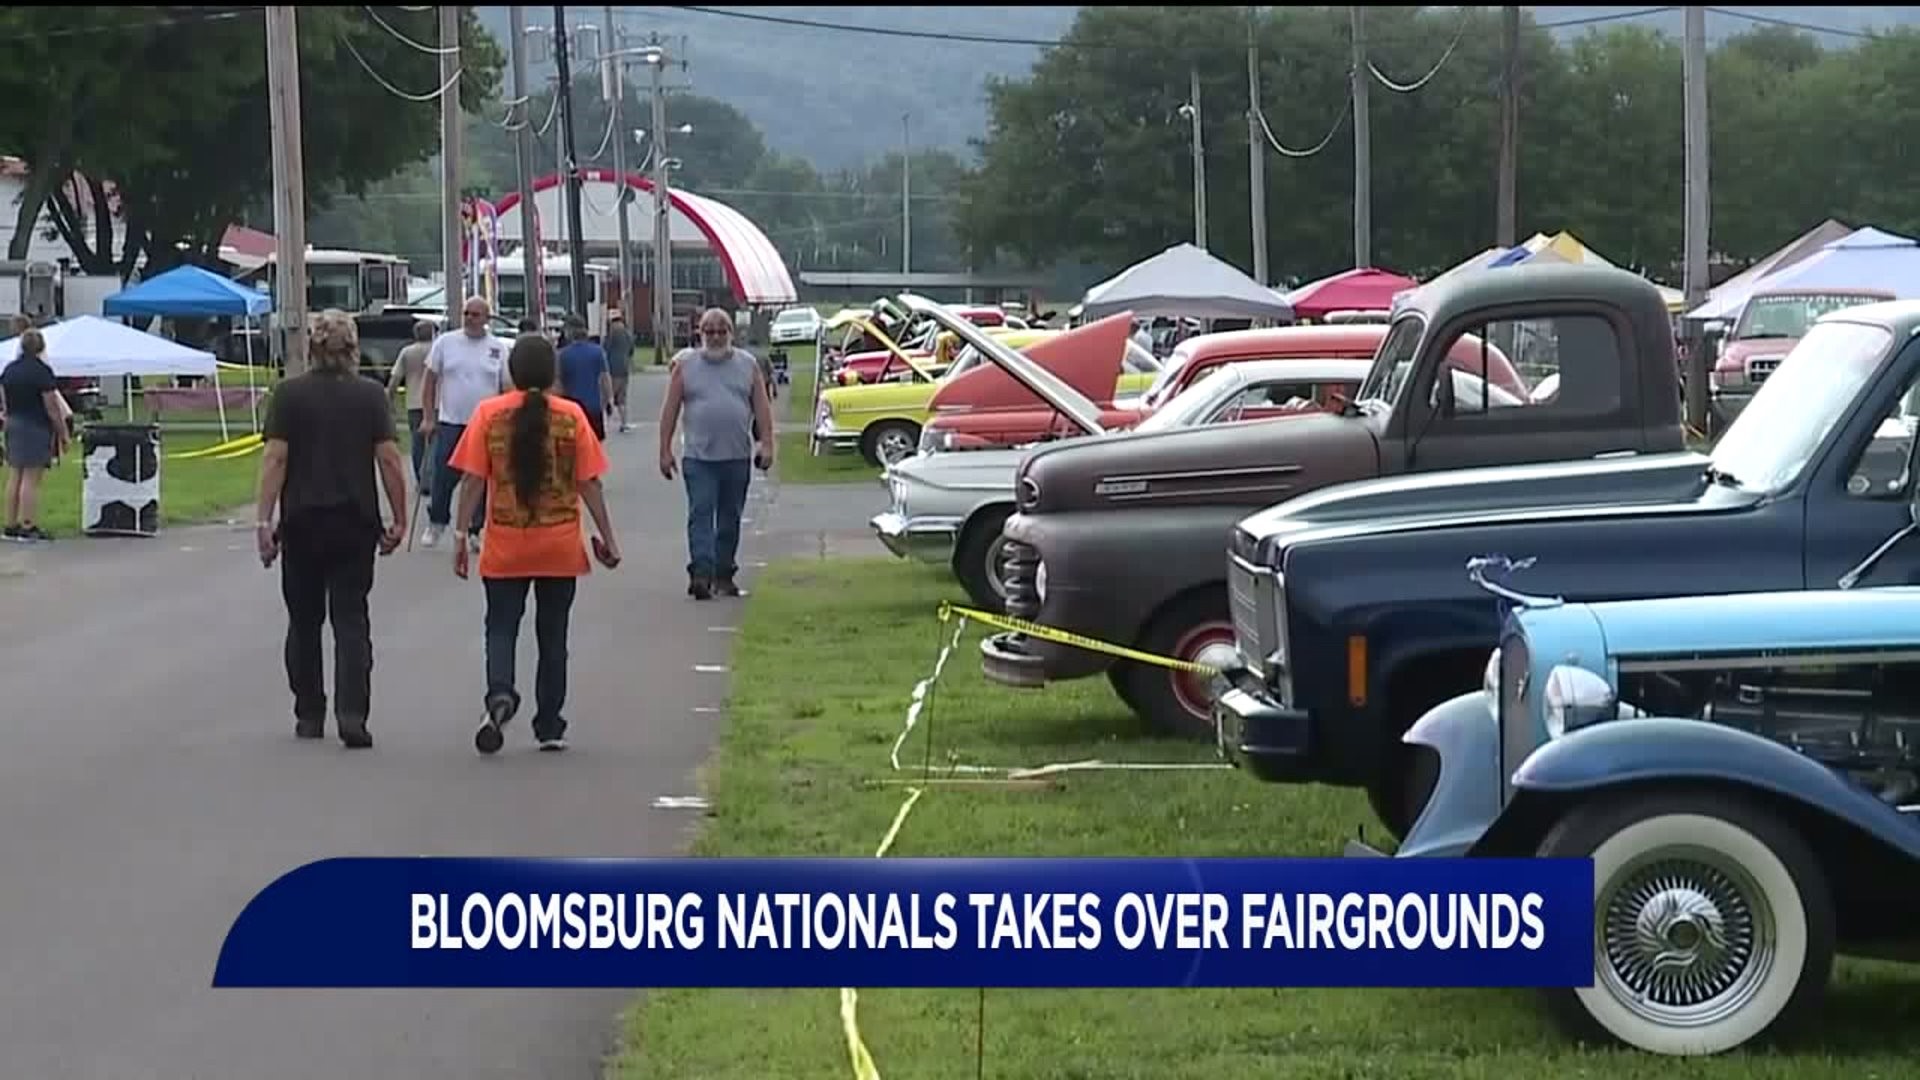 Bloomsburg Nationals Takes Over Fairgrounds